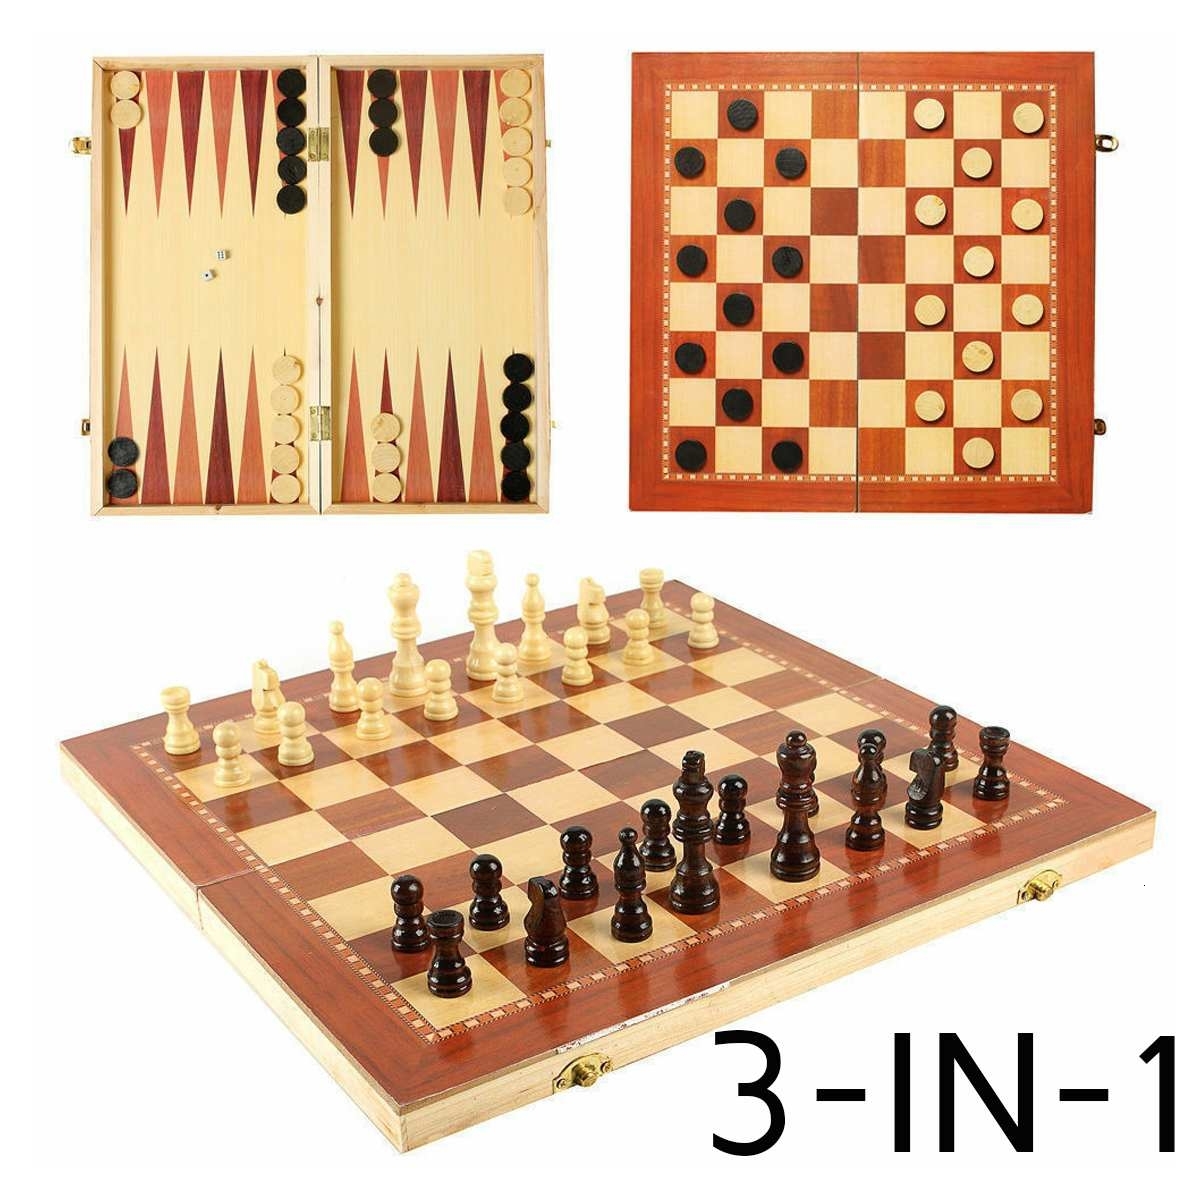 3 in 1 Hand Made Wooden Board Game Set Travel Games Chess Backgammon Draughts